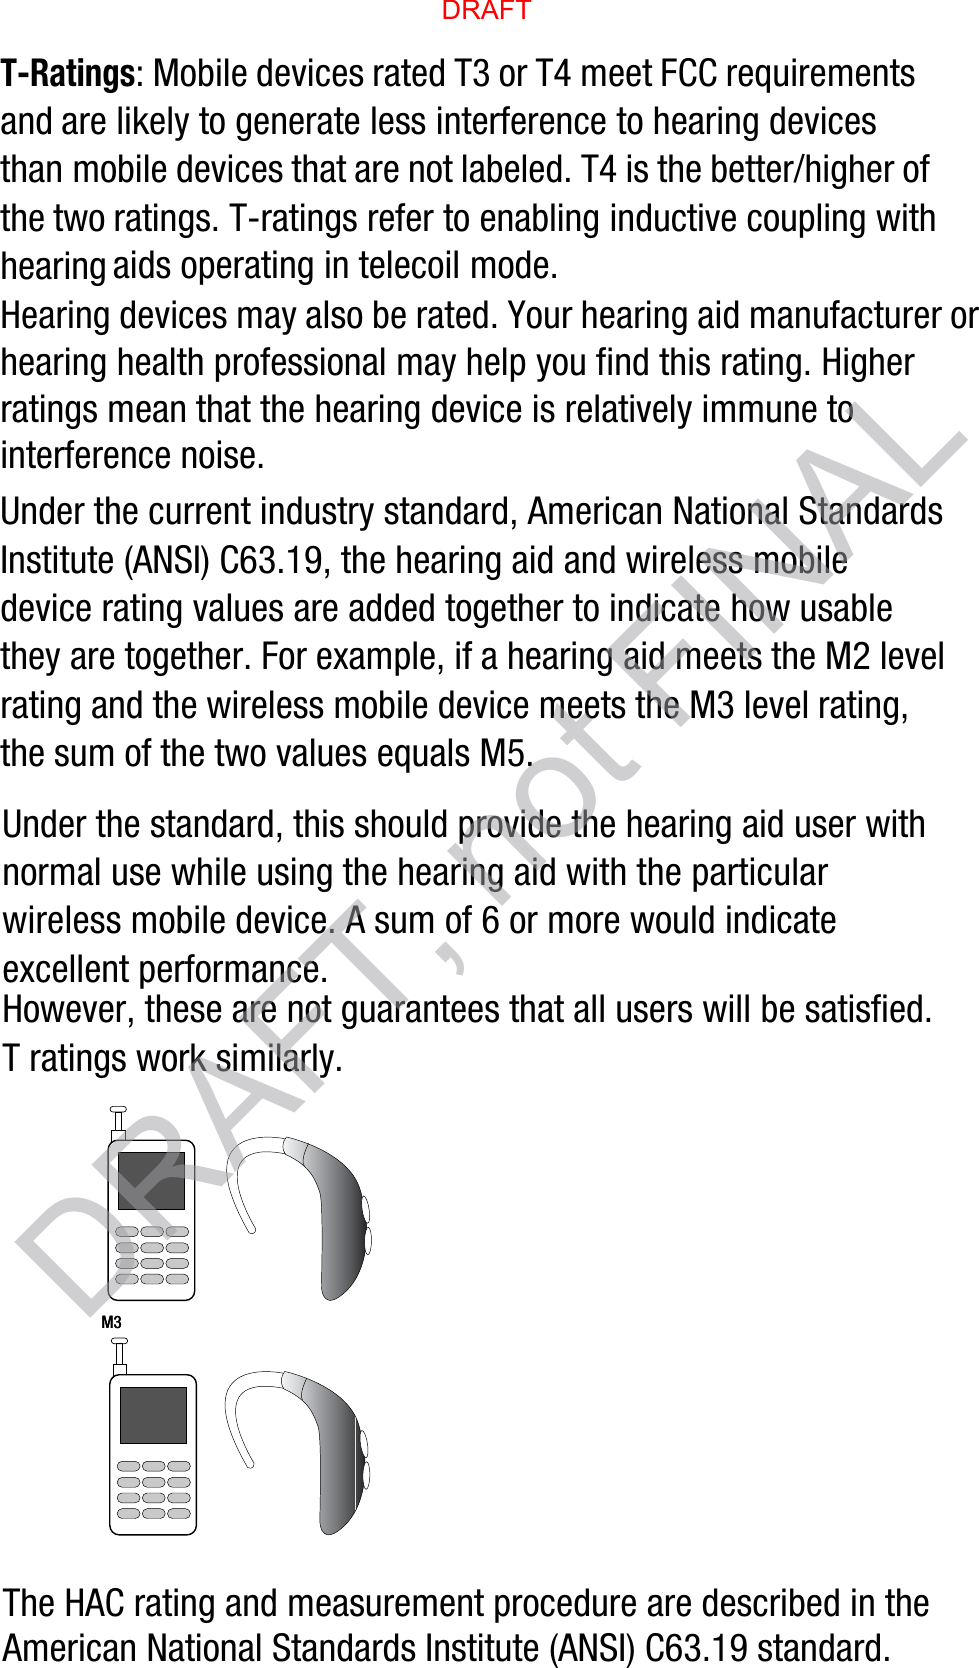 T-Ratings: Mobile devices rated T3 or T4 meet FCC requirements and are likely to generate less interference to hearing devices than mobile devices that are not labeled. T4 is the better/higher of the two ratings. T-ratings refer to enabling inductive coupling with hearing aids operating in telecoil mode.Hearing devices may also be rated. Your hearing aid manufacturer or hearing health professional may help you find this rating. Higher ratings mean that the hearing device is relatively immune to interference noise. Under the current industry standard, American National Standards Institute (ANSI) C63.19, the hearing aid and wireless mobile device rating values are added together to indicate how usable they are together. For example, if a hearing aid meets the M2 level rating and the wireless mobile device meets the M3 level rating, the sum of the two values equals M5. Under the standard, this should provide the hearing aid user with normal use while using the hearing aid with the particular wireless mobile device. A sum of 6 or more would indicate excellent performance.  However, these are not guarantees that all users will be satisfied. T ratings work similarly.The HAC rating and measurement procedure are described in the American National Standards Institute (ANSI) C63.19 standard.    M3       M3        DRAFTDRAFT, not FINAL